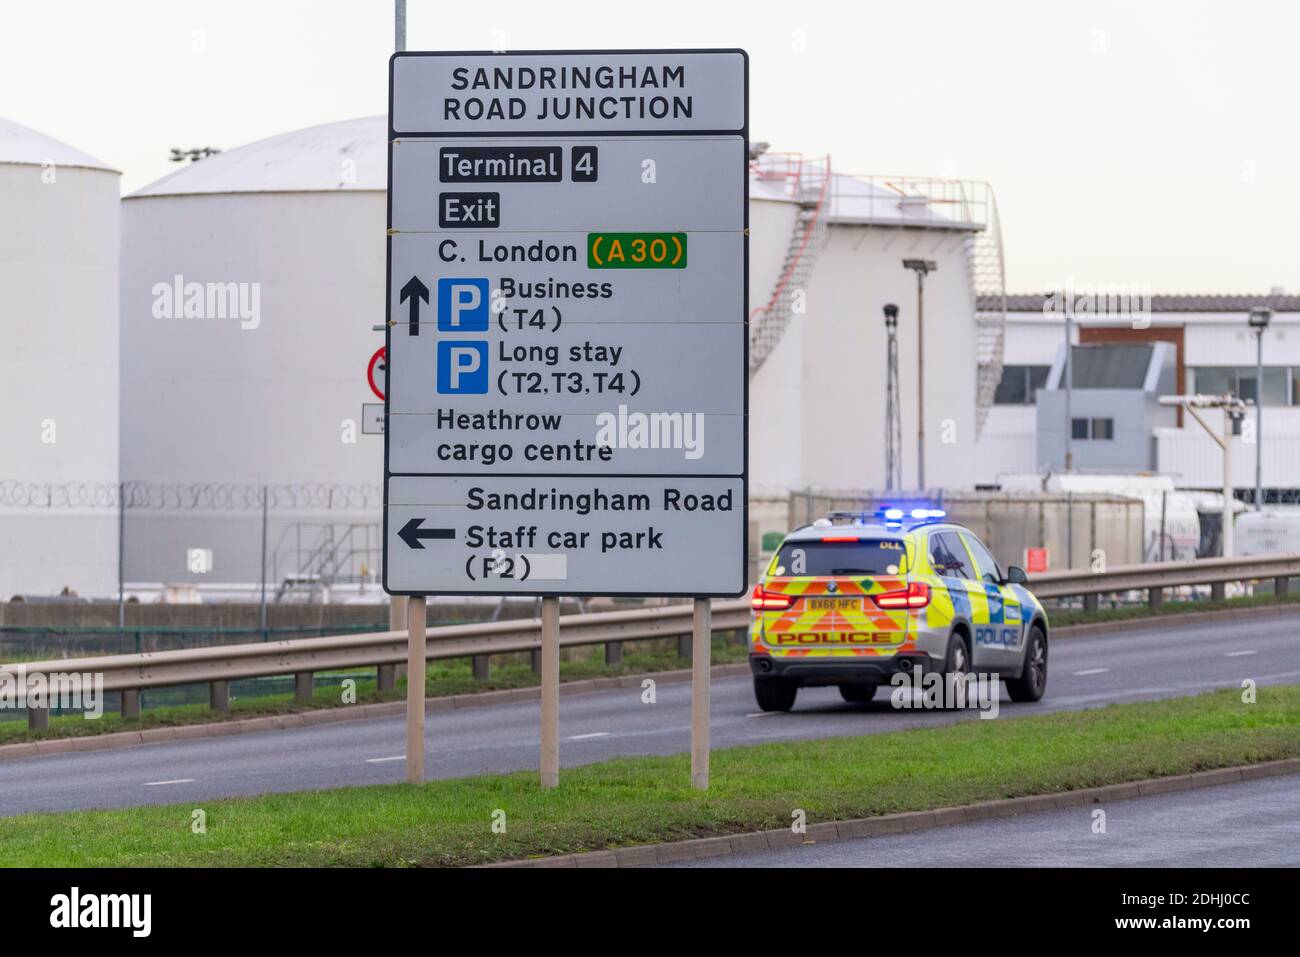 Police responding to an incident at the Sandringham Road Fuel Farm entrance at London Heathrow Airport, UK, close to the fuel tanks. Security Stock Photo